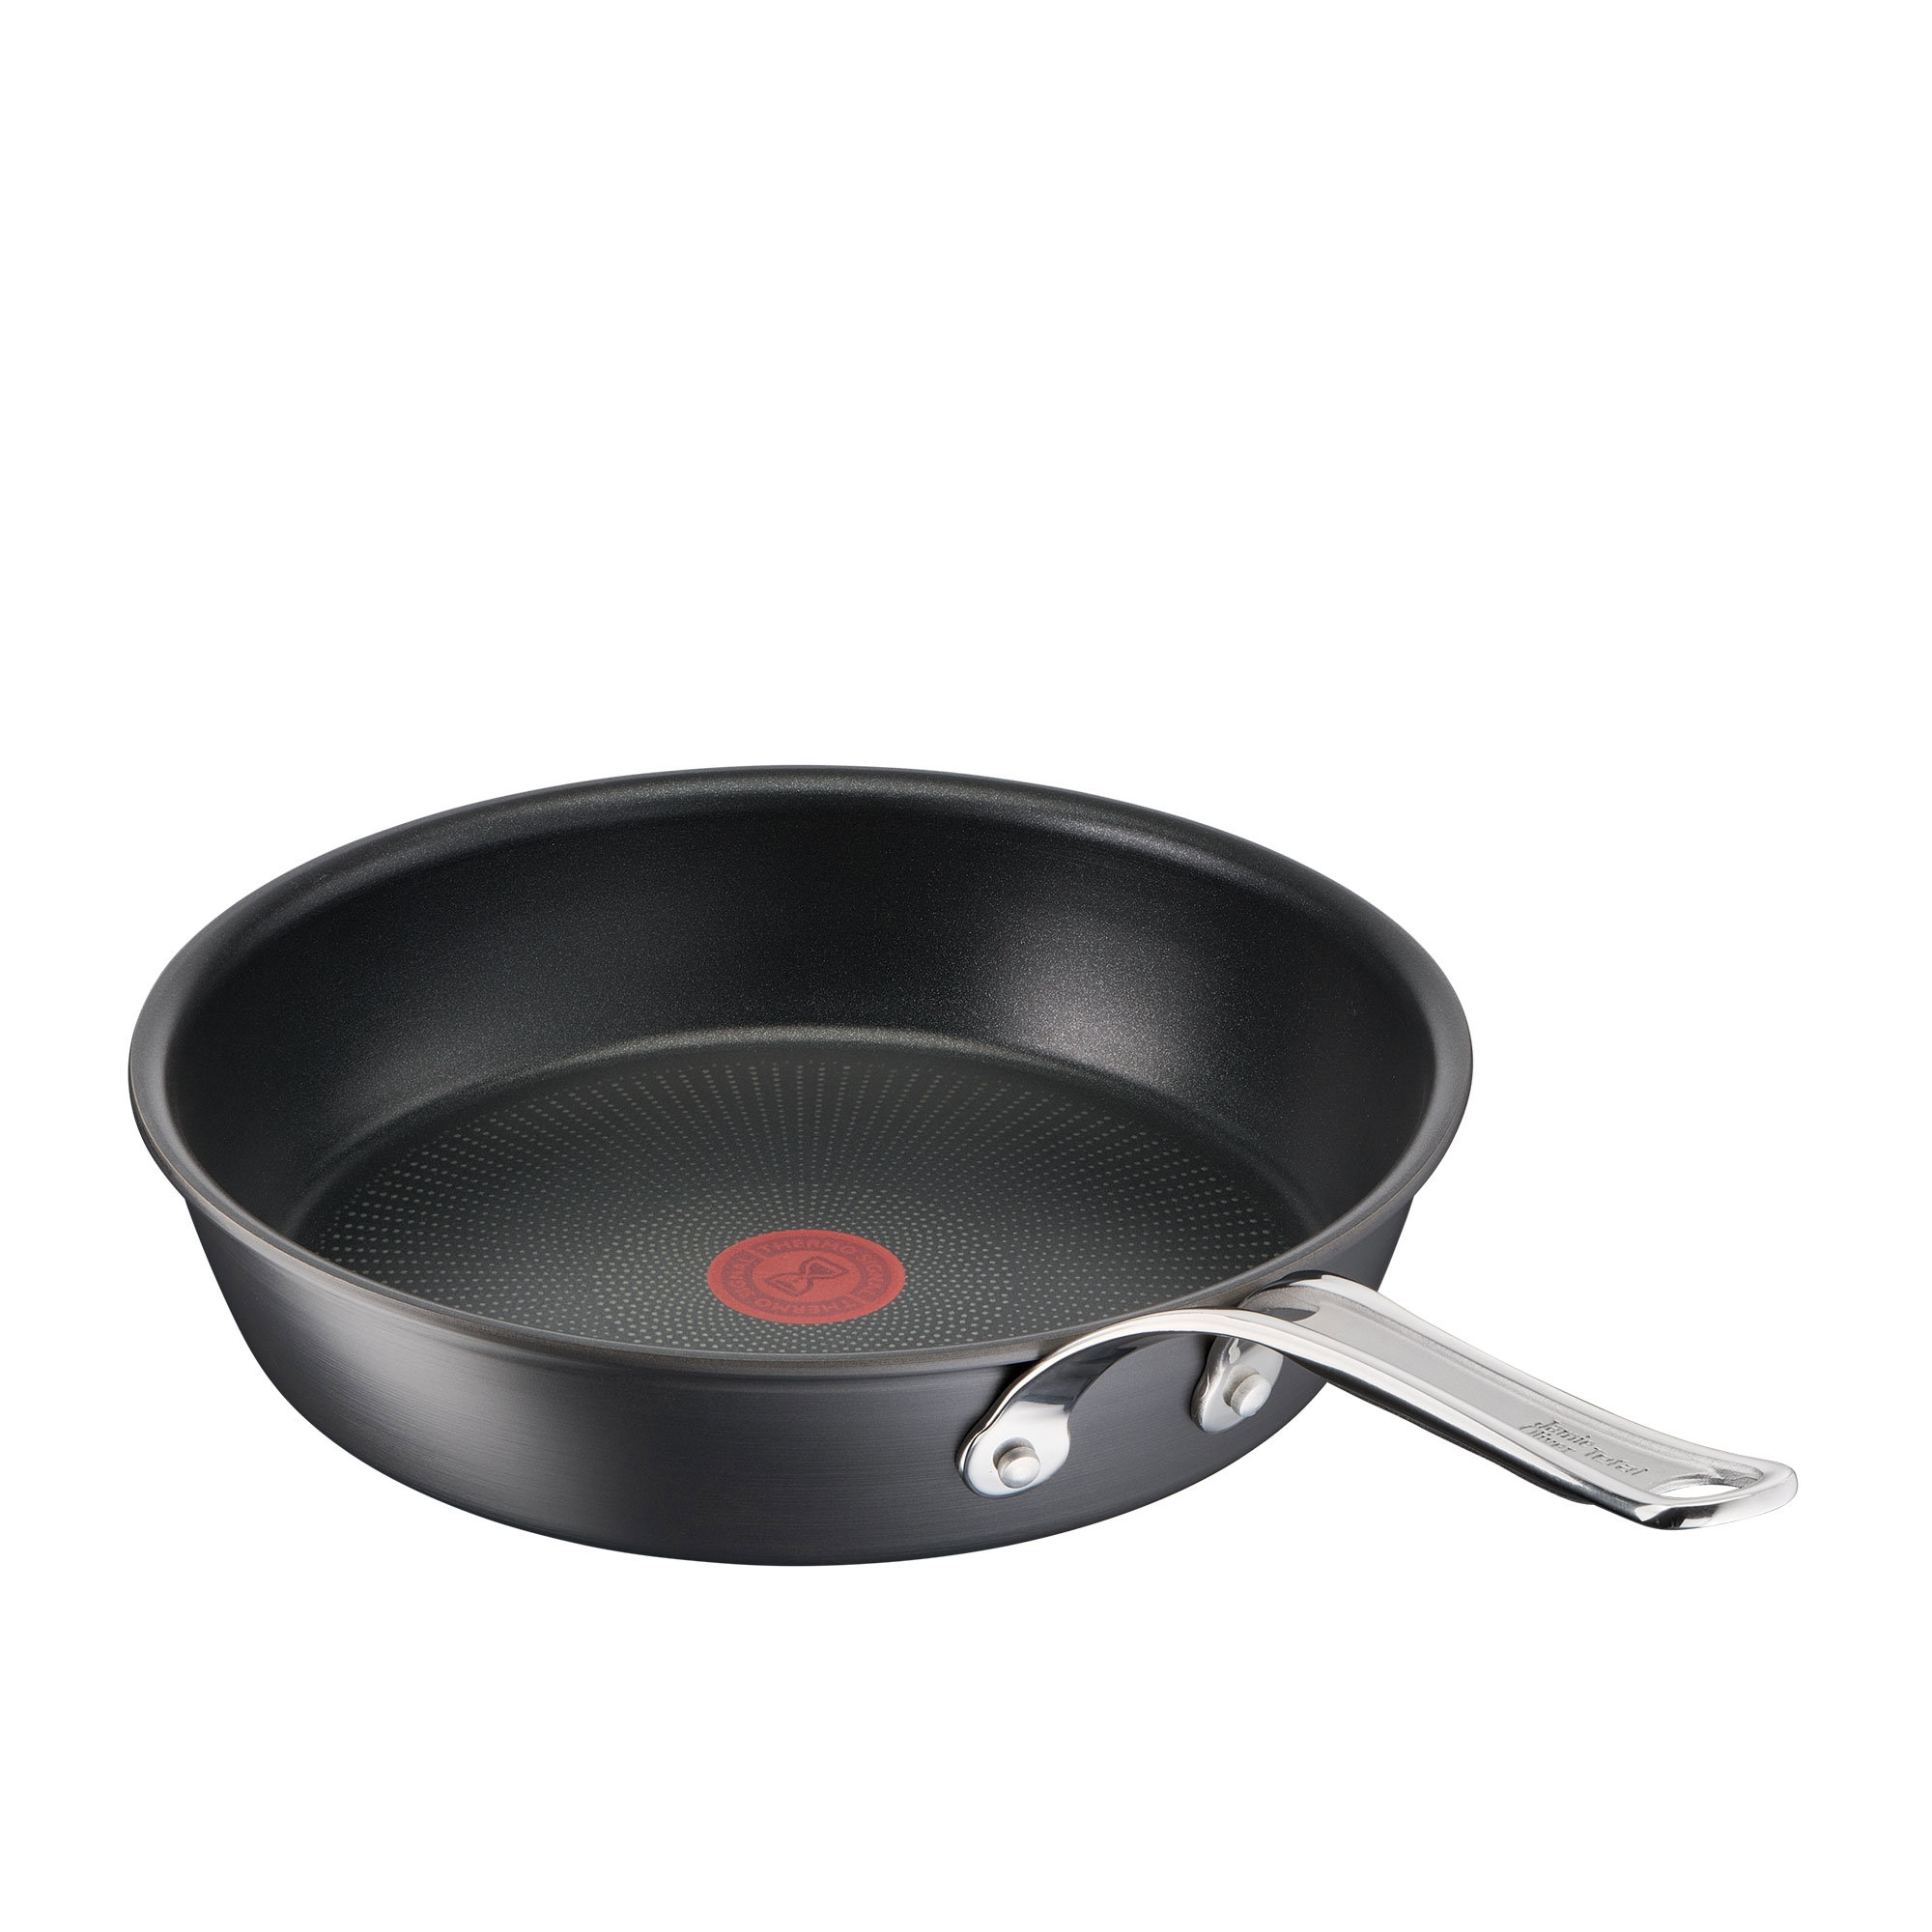 Jamie Oliver by Tefal Cook's Classic Hard Anodised Induction Frypan 24cm Image 2